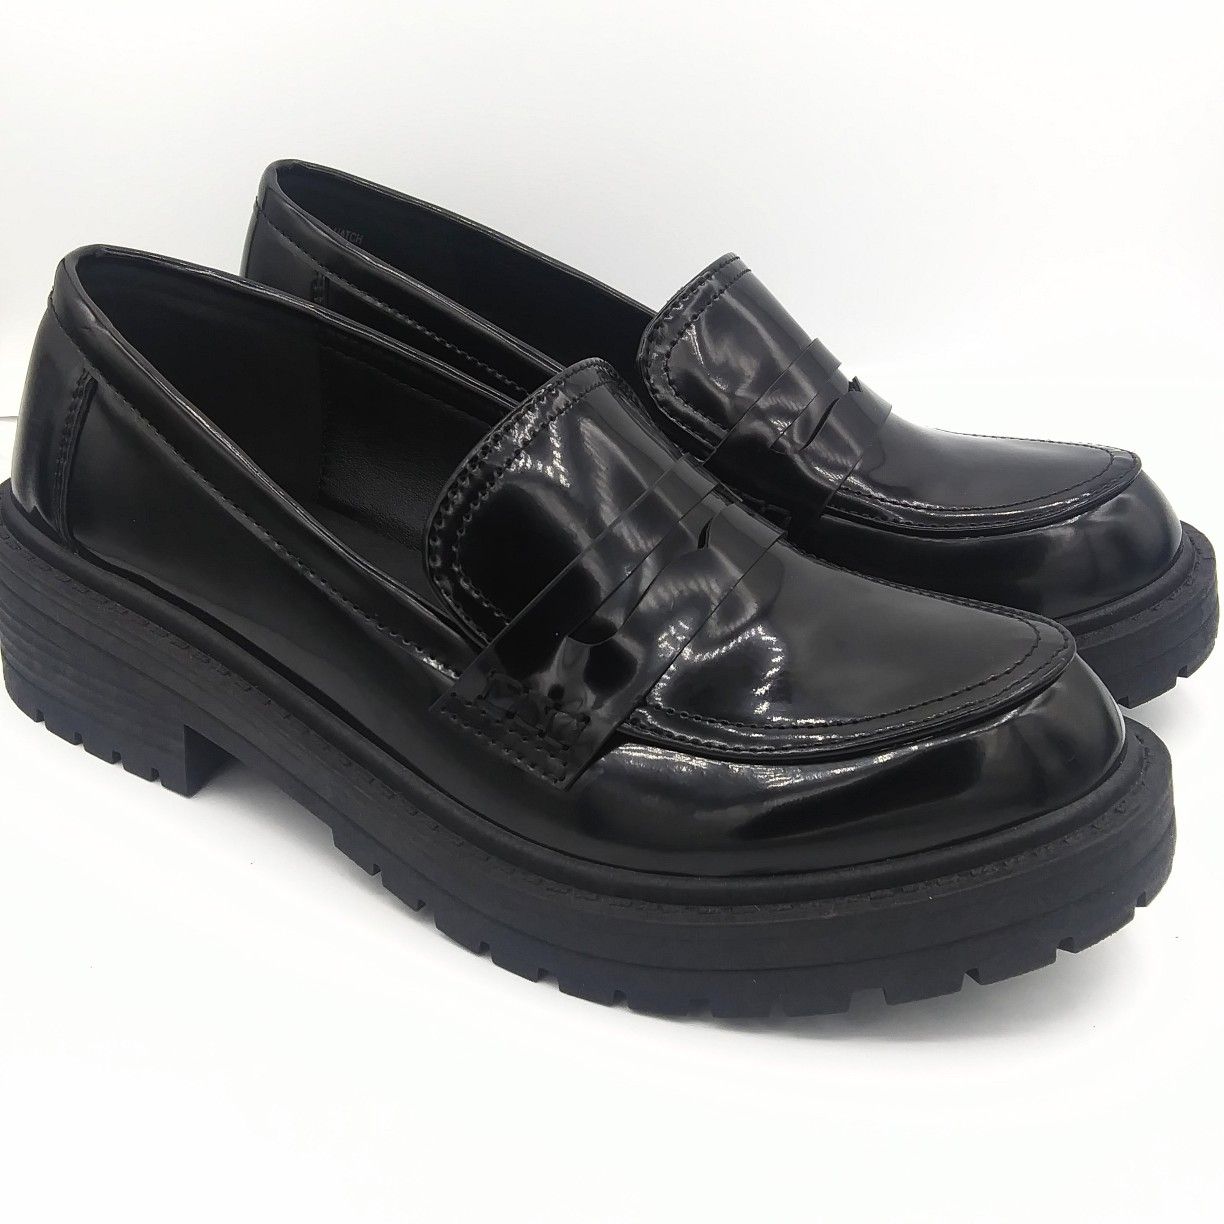 NWT Madden Girl women's patent leather loafers